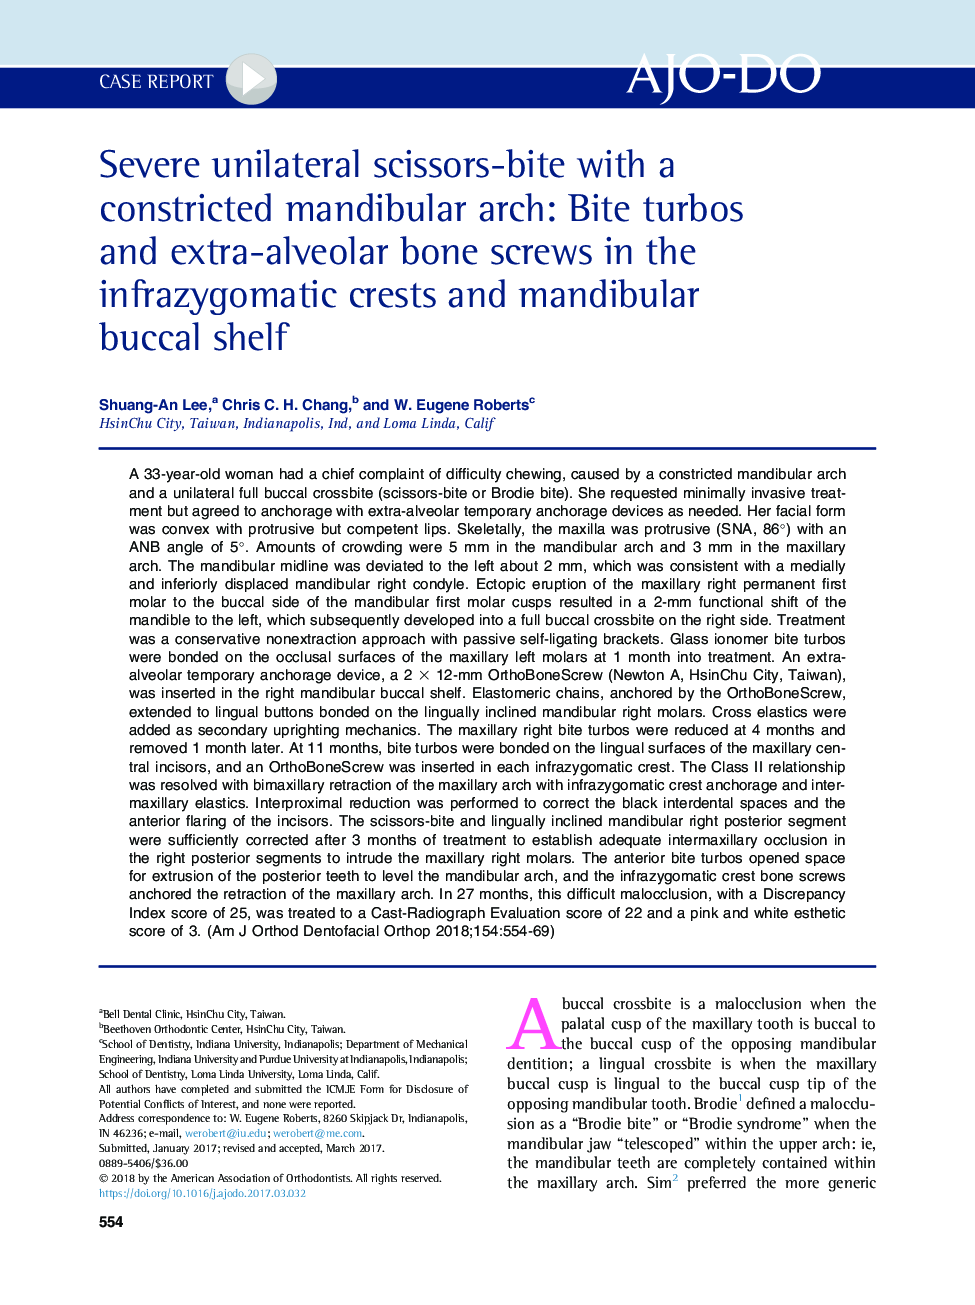 Severe unilateral scissors-bite with a constricted mandibular arch: Bite turbos and extra-alveolar bone screws in the infrazygomatic crests and mandibular buccal shelf